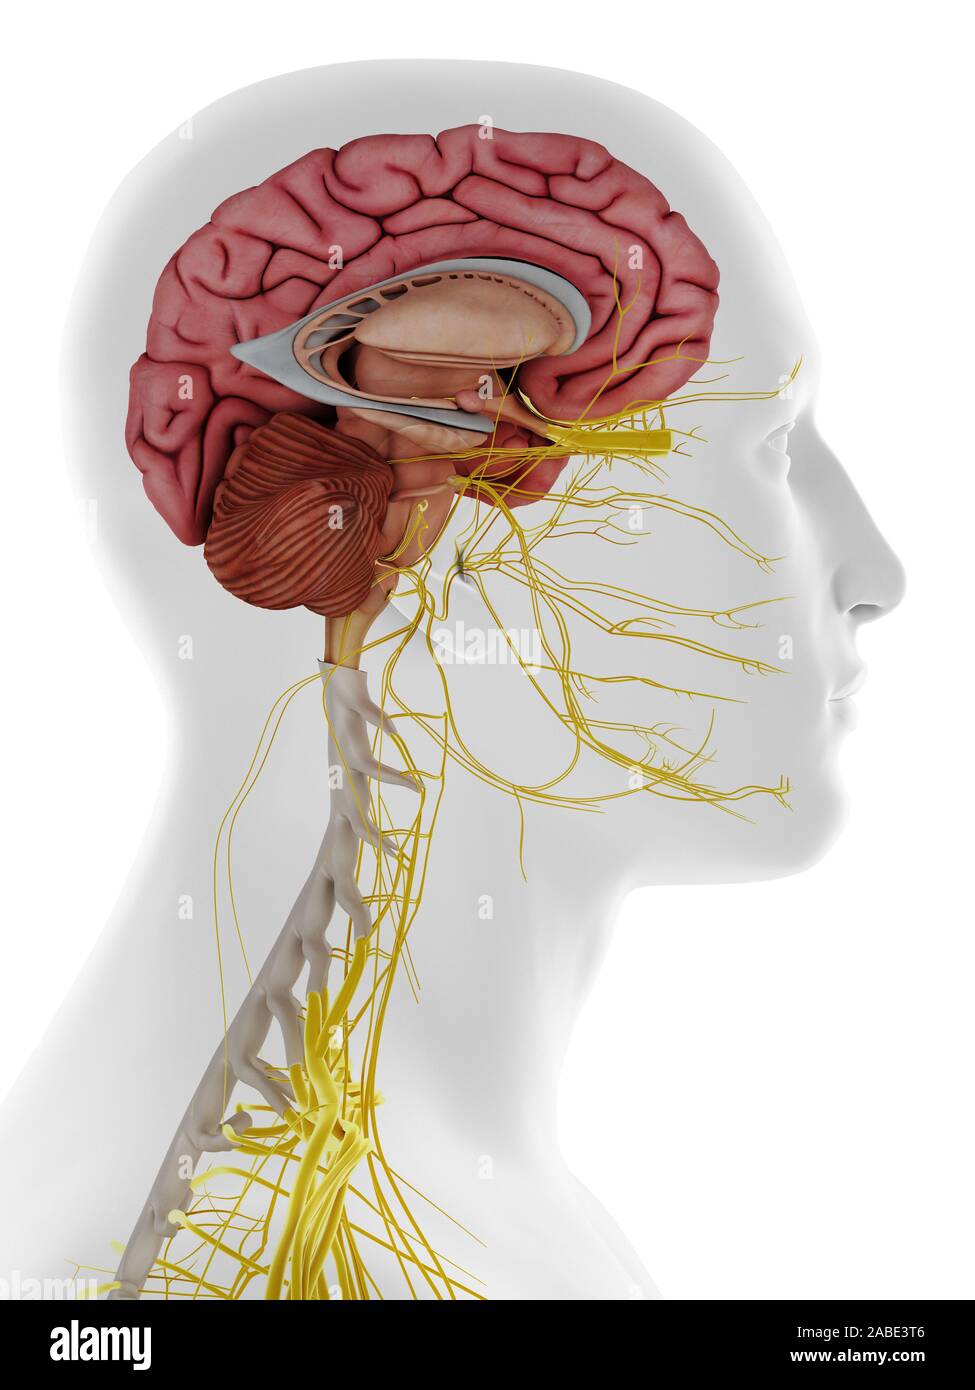 3d rendered medically accurate illustration of the lateral internal brain anatomy Stock Photo